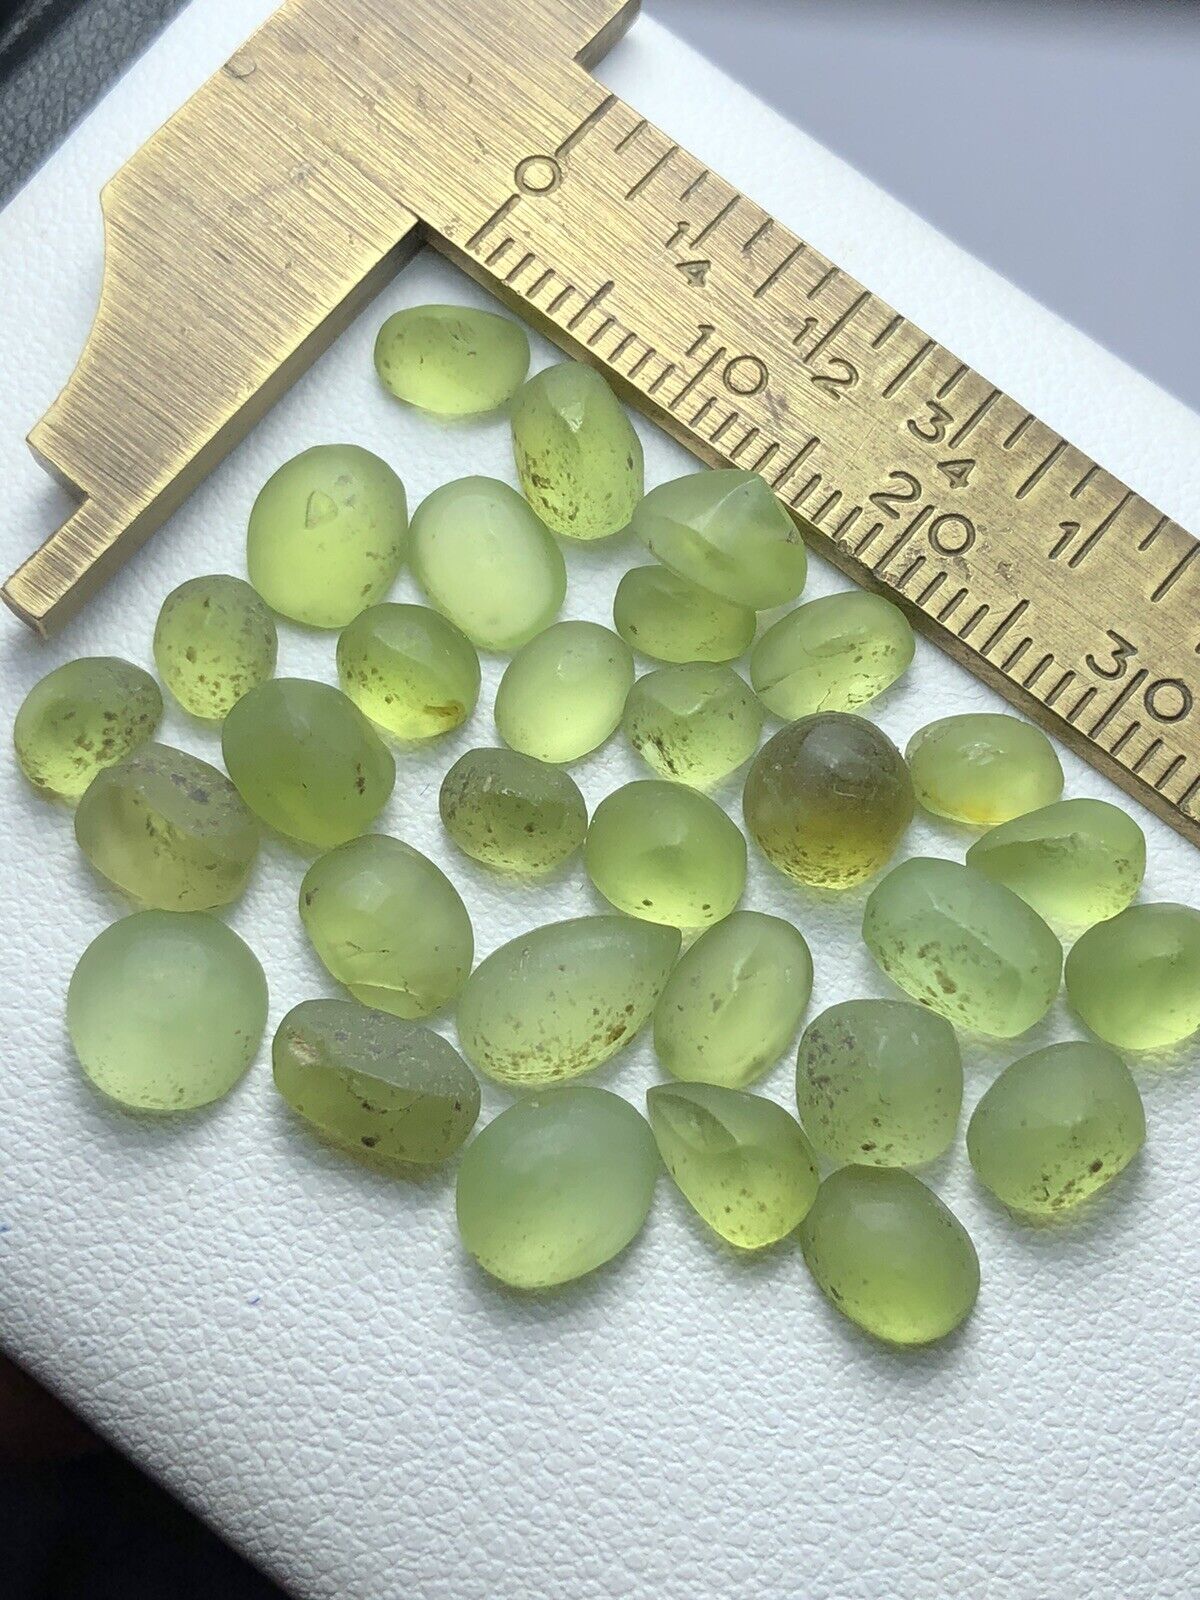 31 Crt / 31 Piece / Natural Peridot Preformed Shapes, Ready For Faceted mm Size